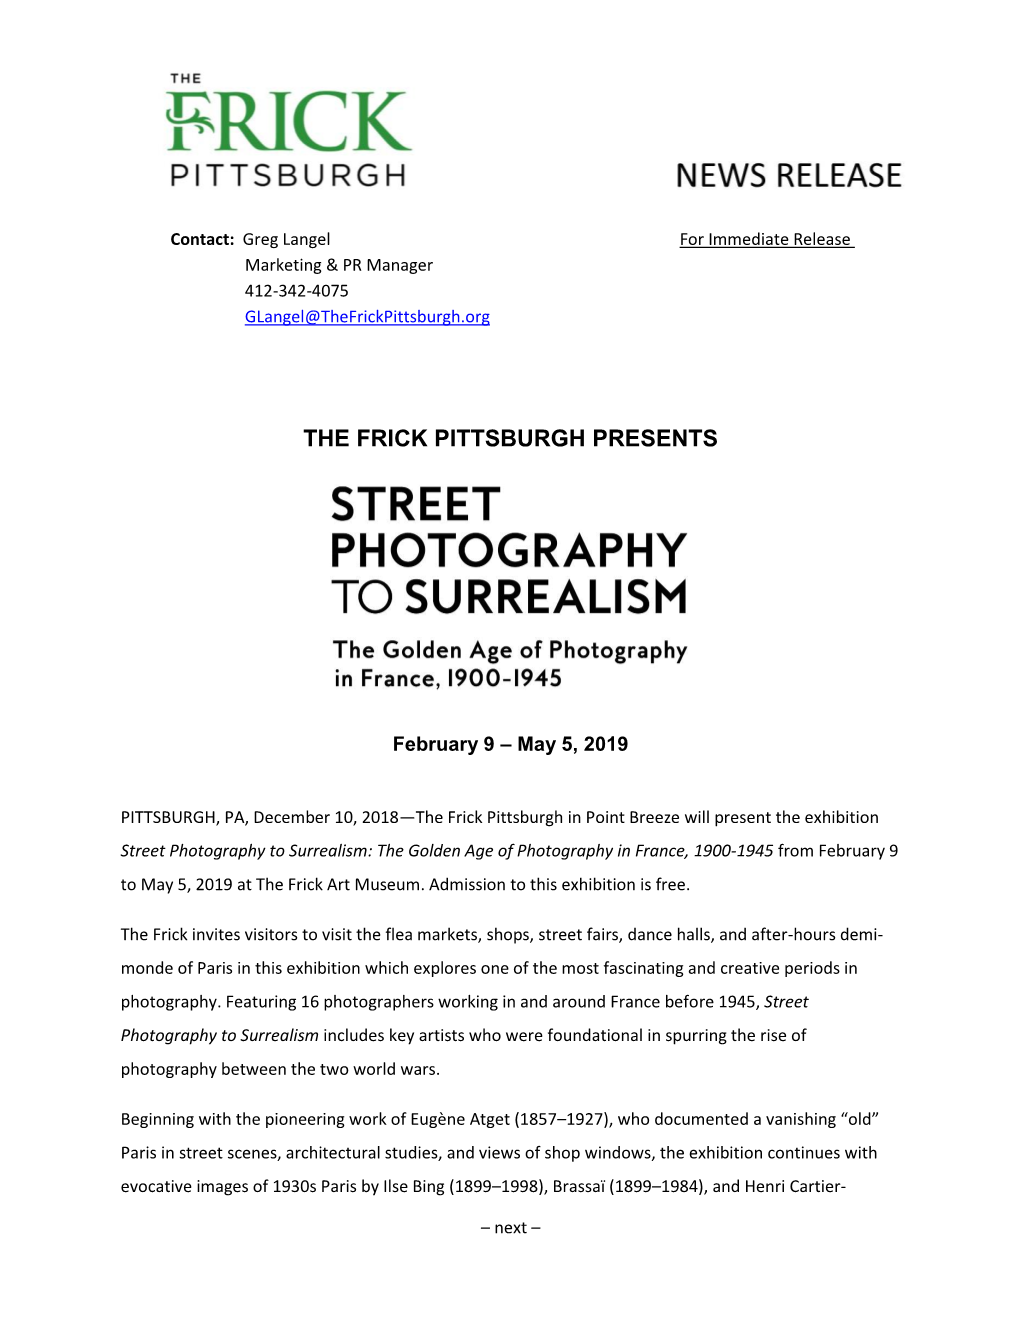 The Frick Pittsburgh Presents Street Photography to Surrealism